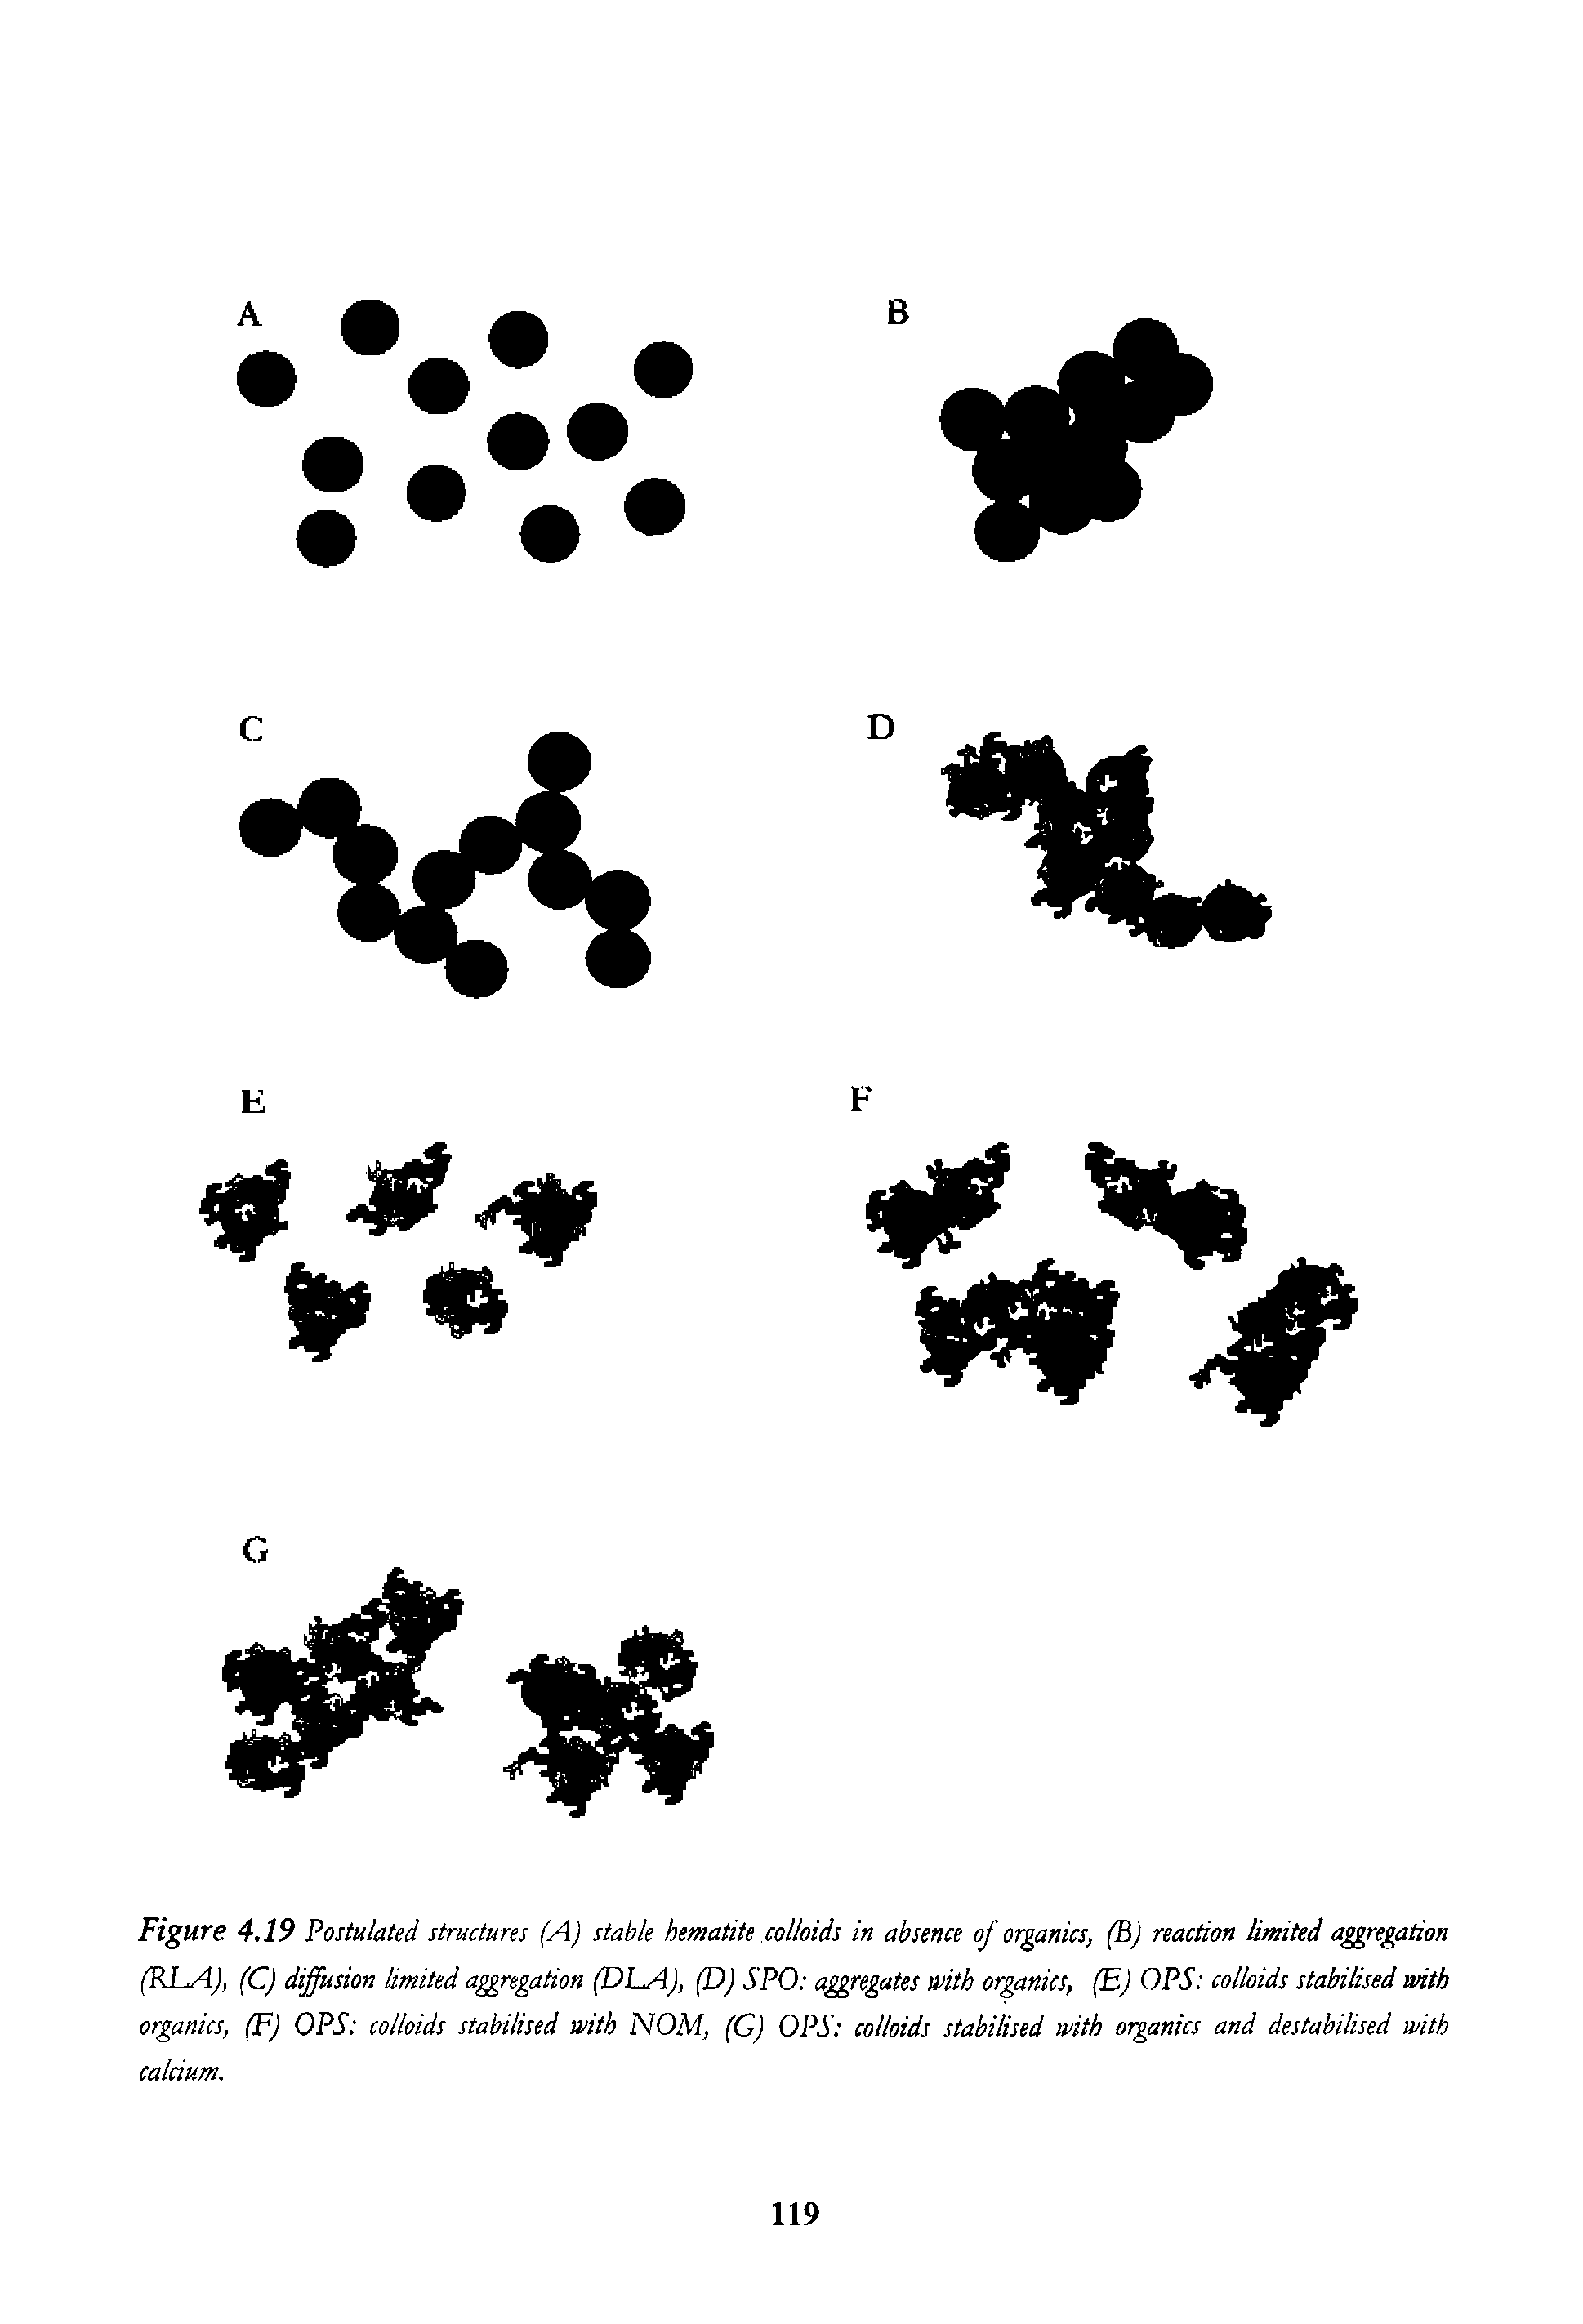 Figure 4.19 Postulated structures (A) stable hematite colloids in absence of organics, (B) reaction limited aggregation (RLAJ, (C) diffusion limited aggregation (DLAJ, (D) SPO aggregates with organics, (E) OPS colloids stabilised with organics, (F) OPS colloids stabilised with NOM, (G) OPS colloids stabilised with organics and destabilised with calcium.